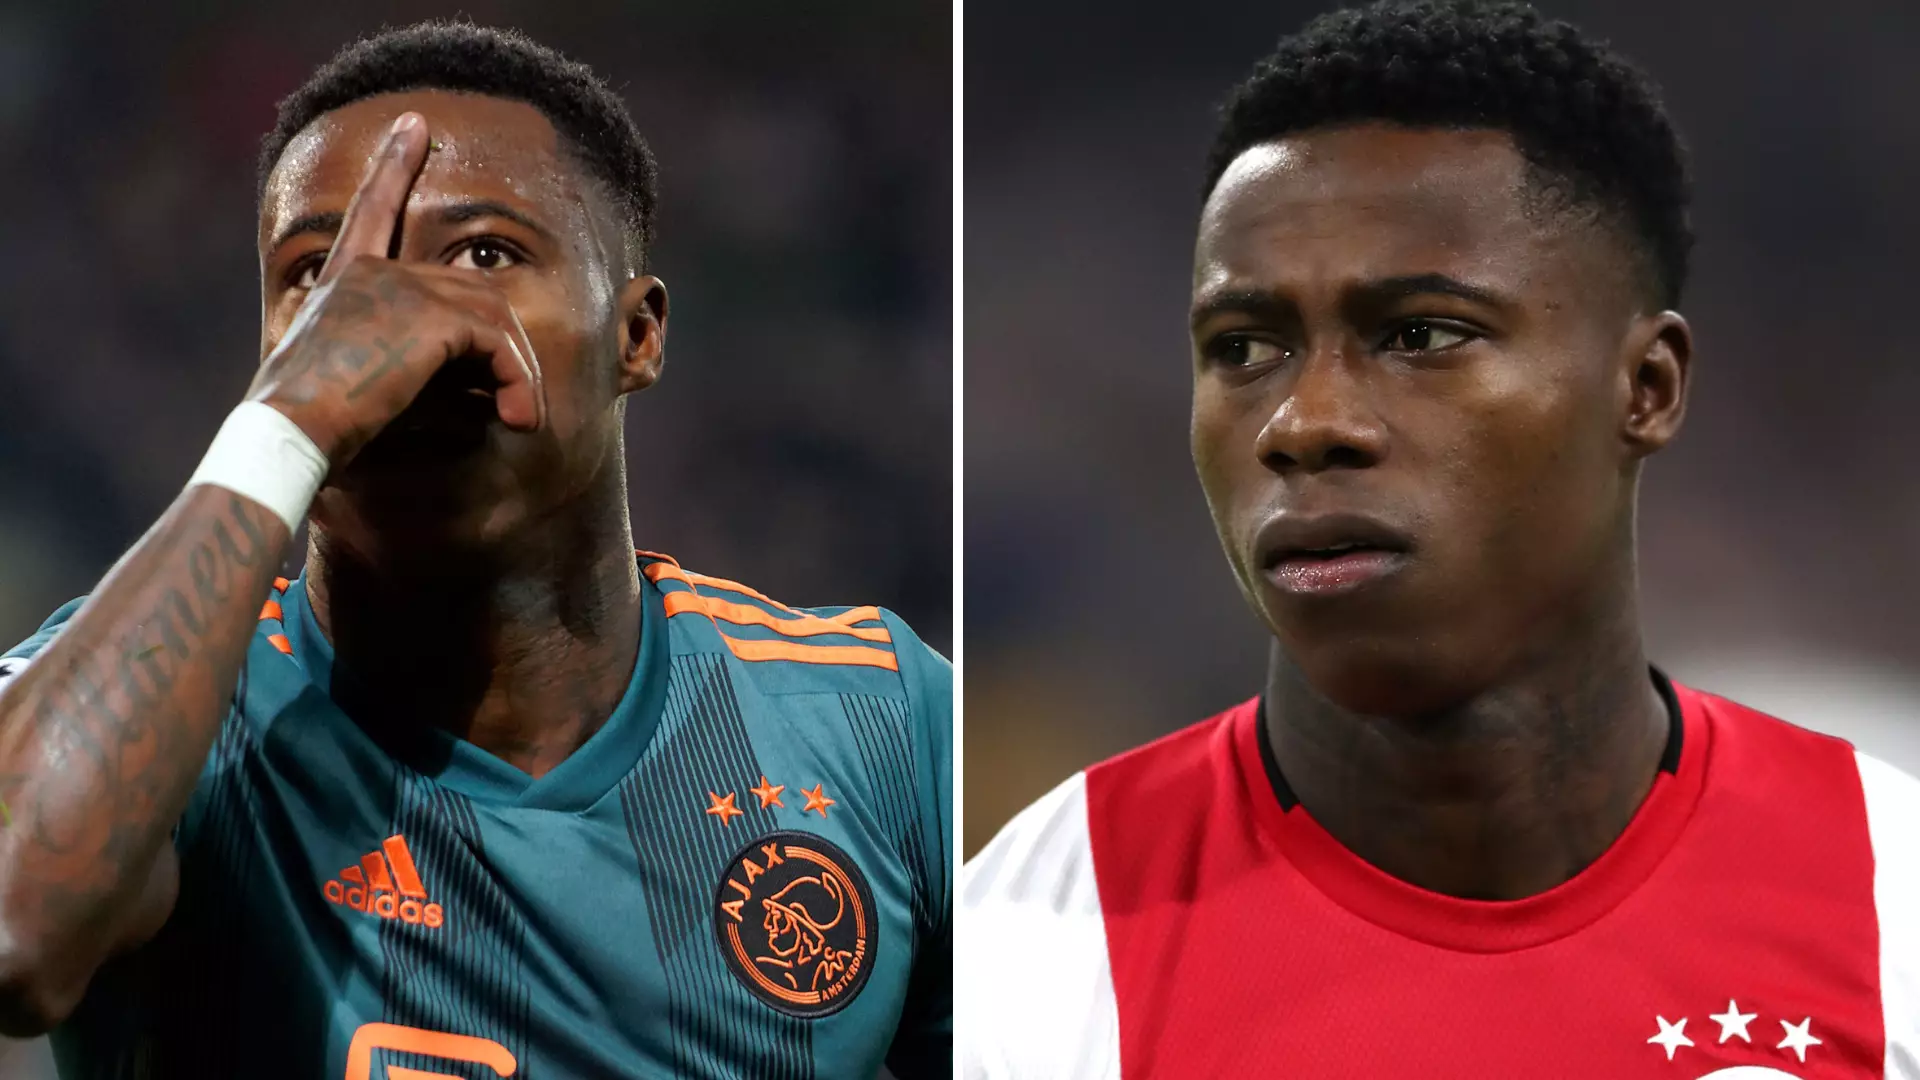 Quincy Promes 'Arrested For Alleged Stabbing During Fierce Argument With Family Member'